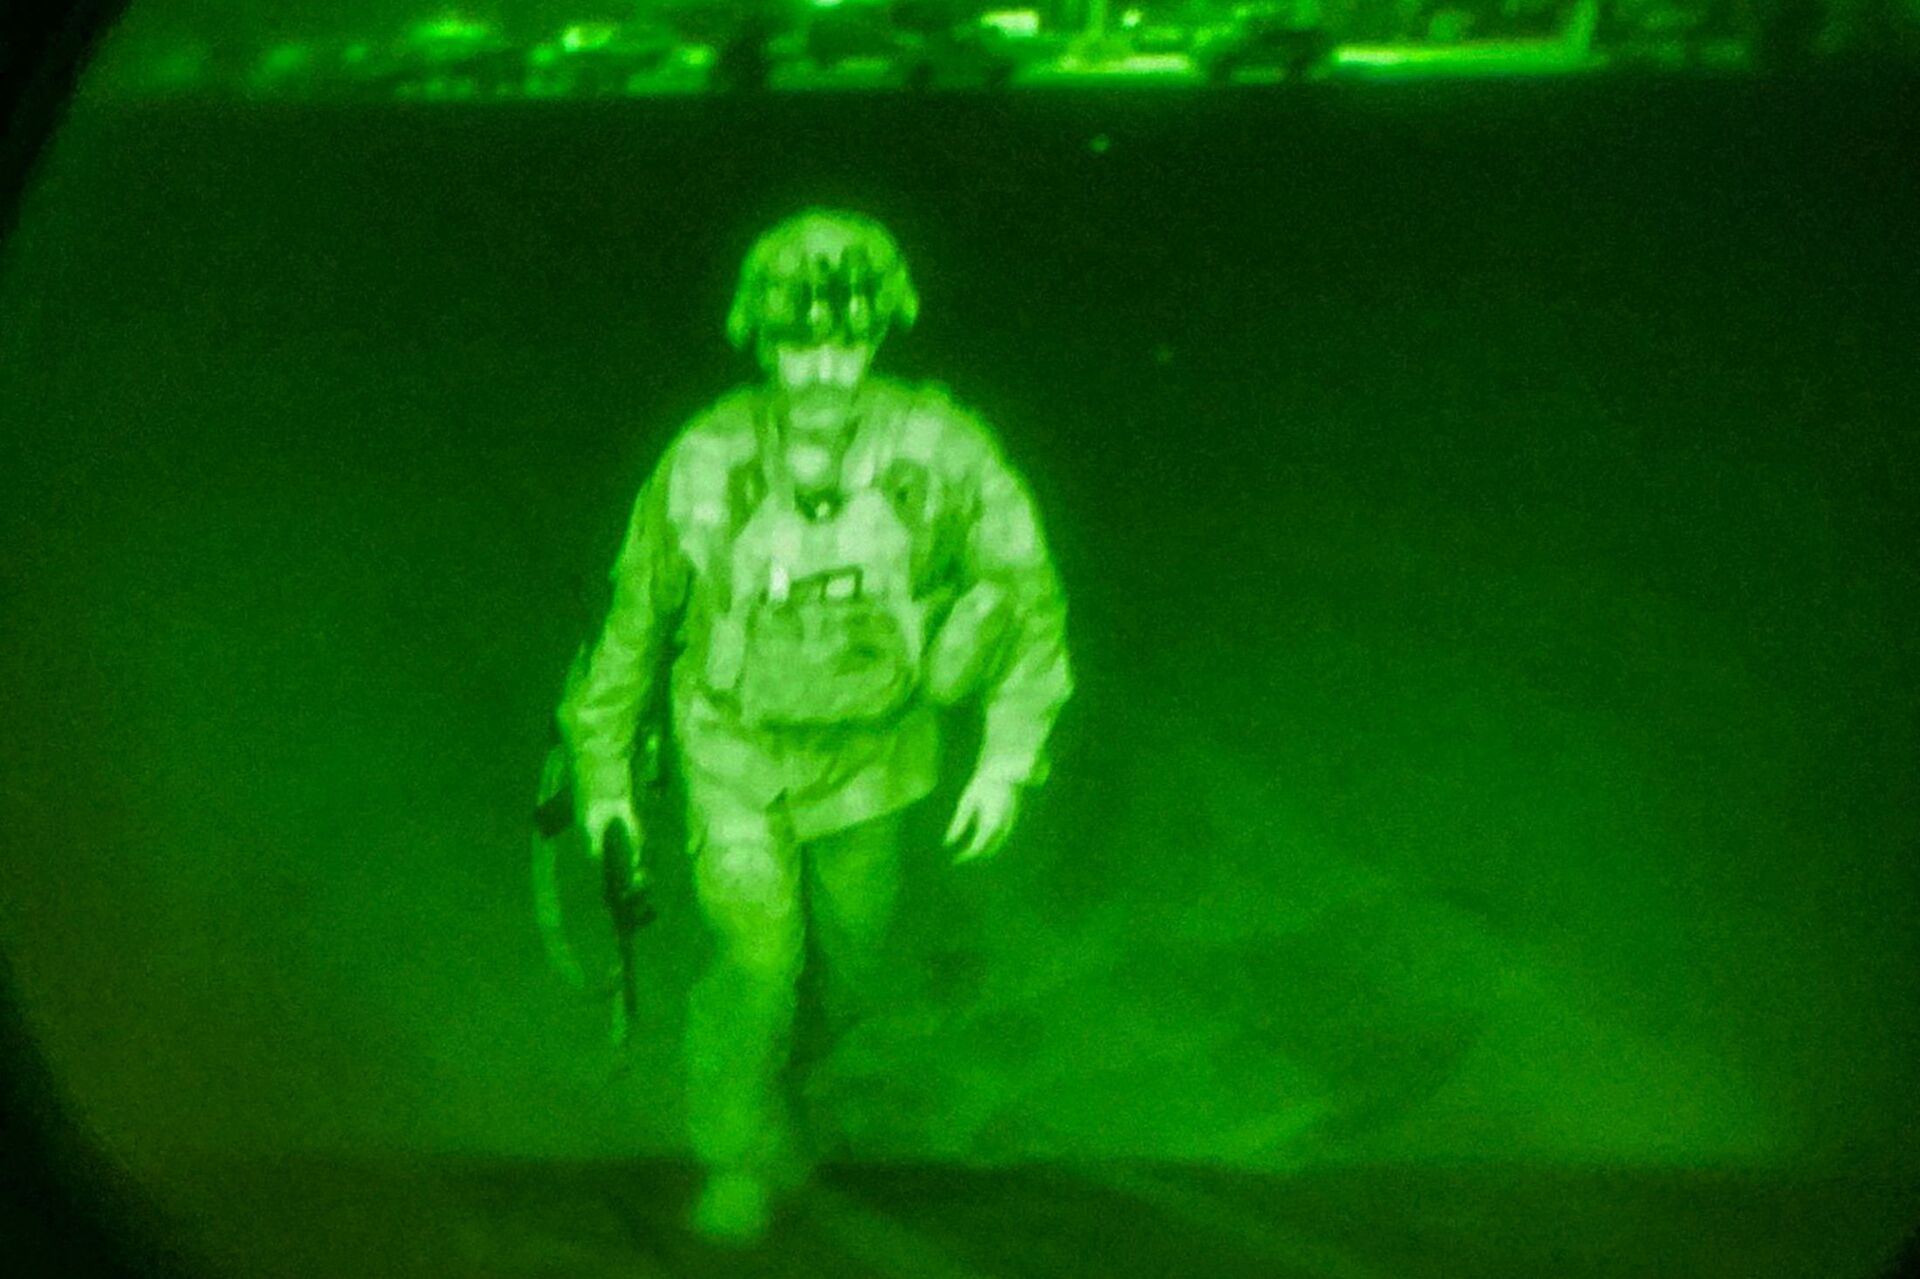 U.S. Army Major General Chris Donahue, commander of the 82nd Airborne Division, steps on board a C-17 transport plane as the last U.S. service member to leave Hamid Karzai International Airport in Kabul, Afghanistan August 30, 2021 in a photograph taken using night vision optics - Sputnik International, 1920, 07.09.2021